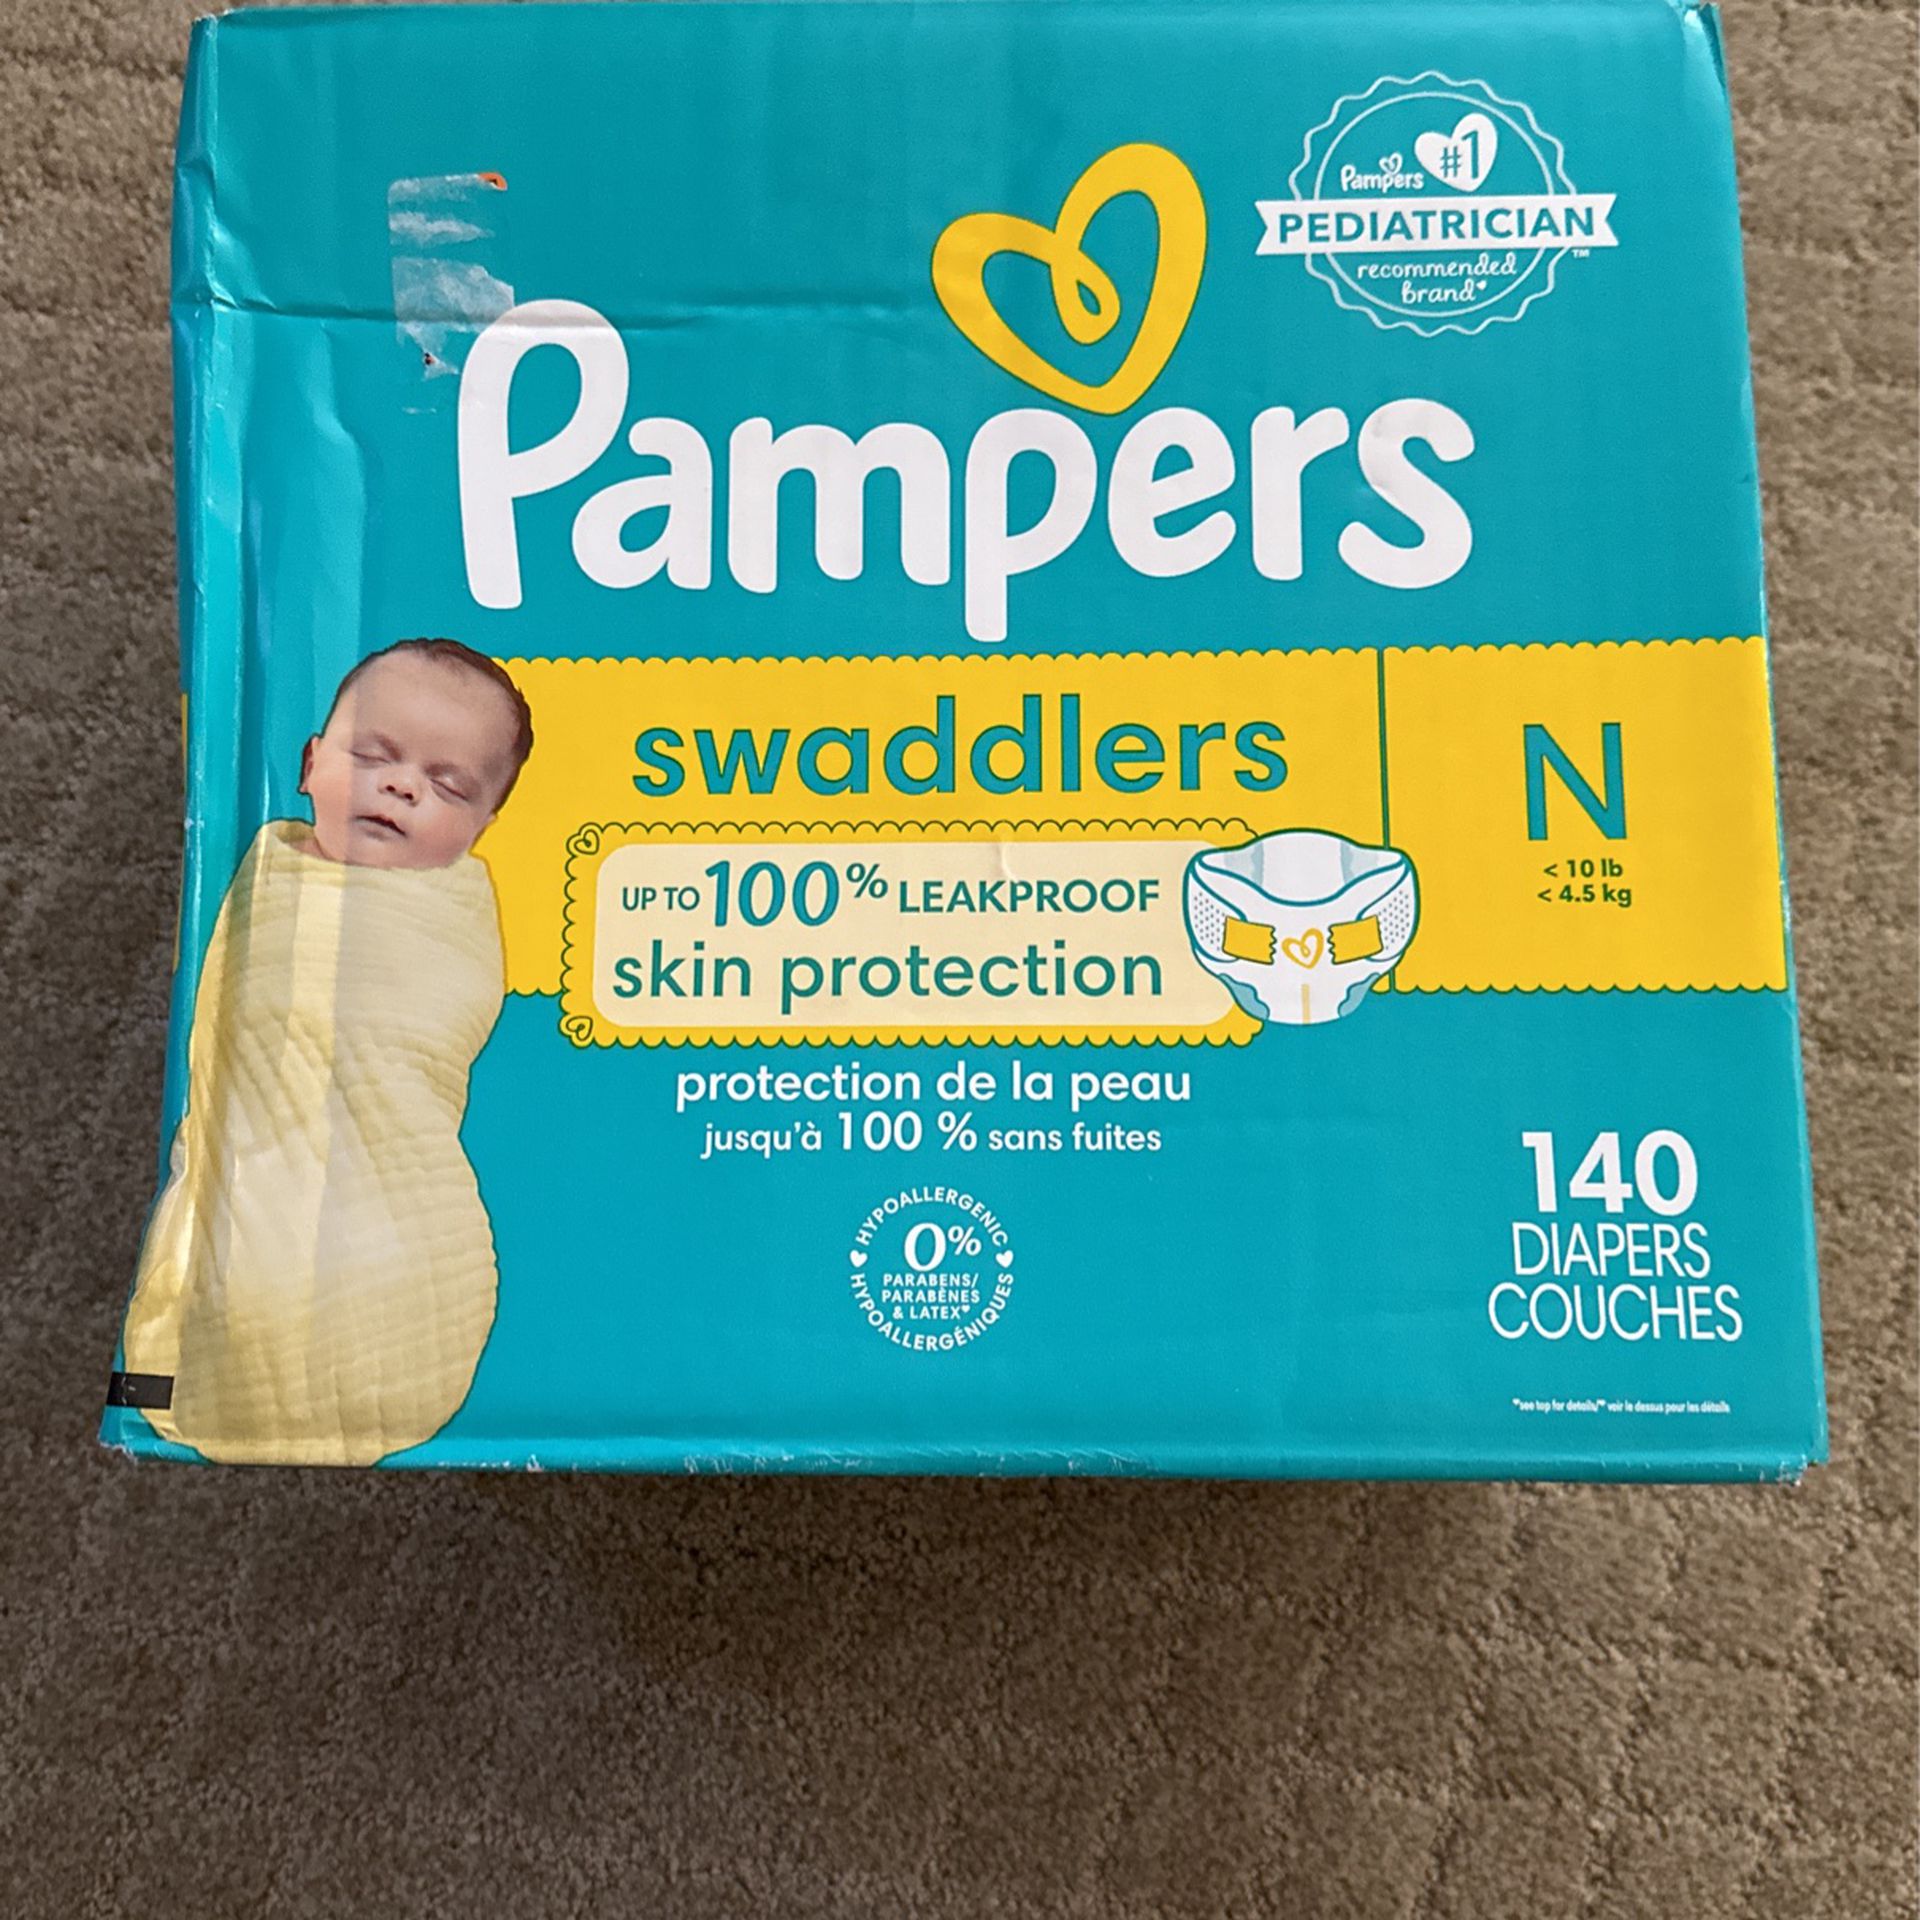 Pampers Swaddlers (size Newborn)